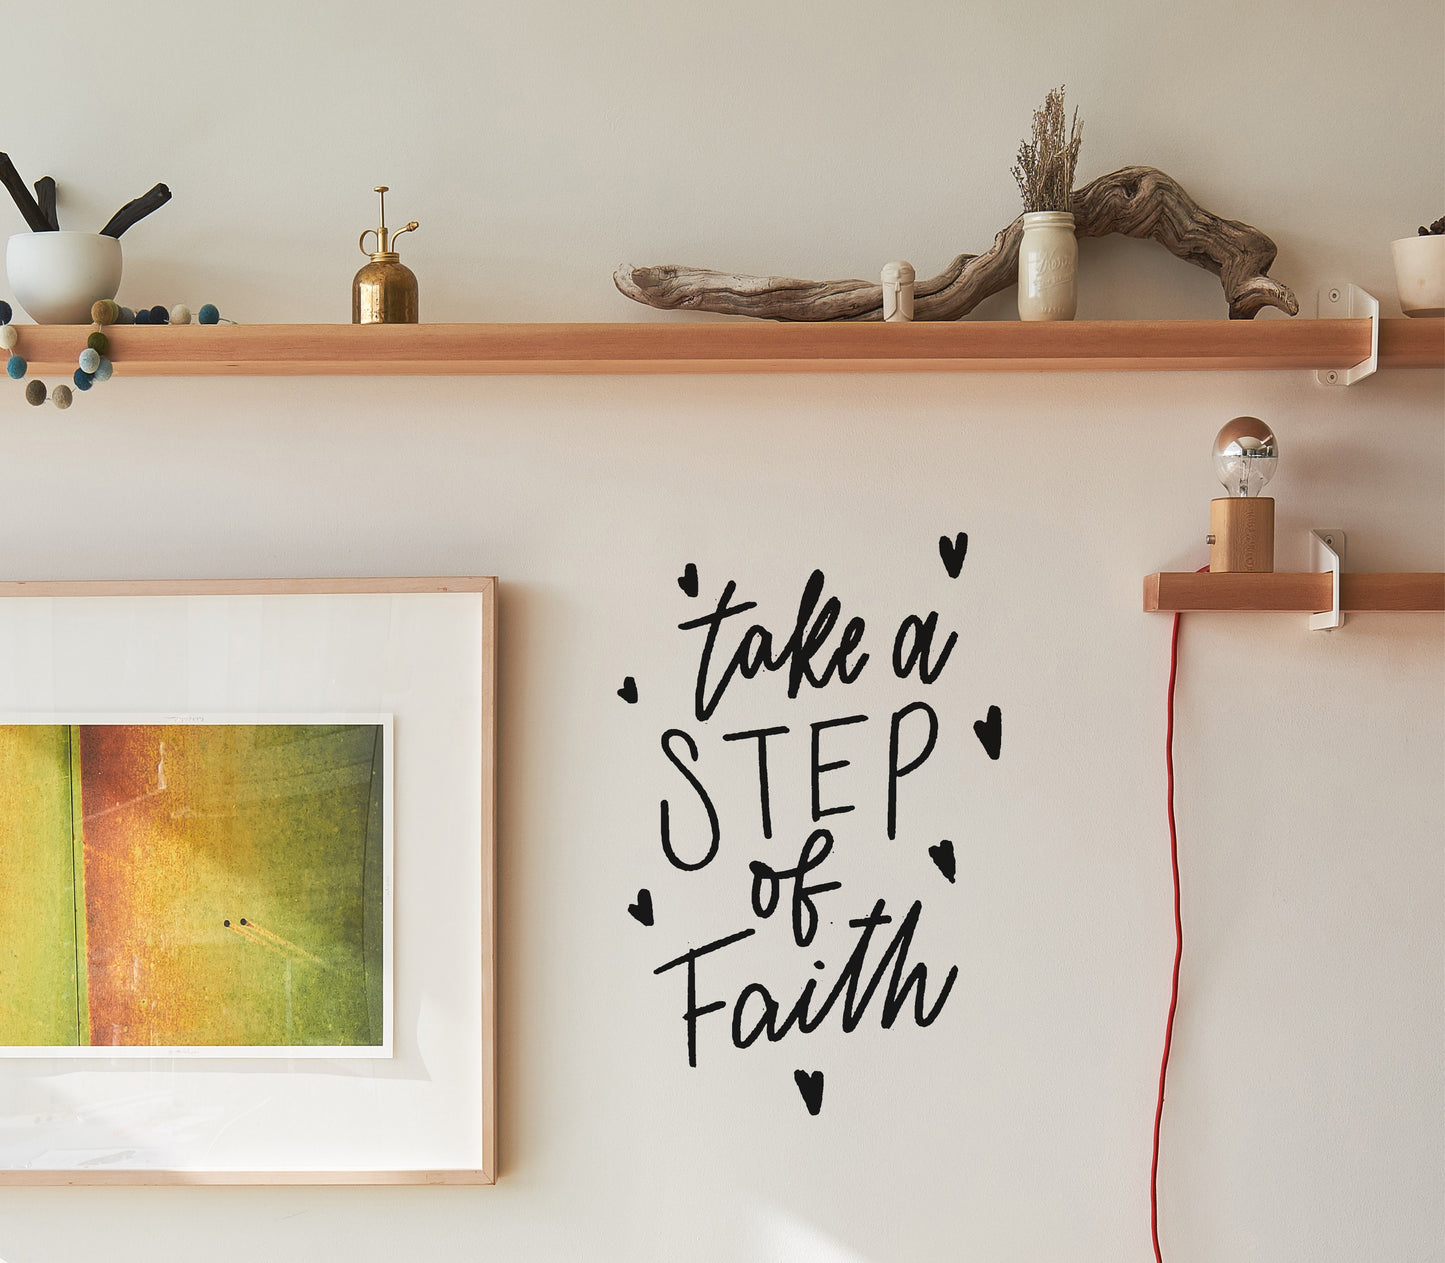 Take a step of faith christian quote vinyl decal sticker